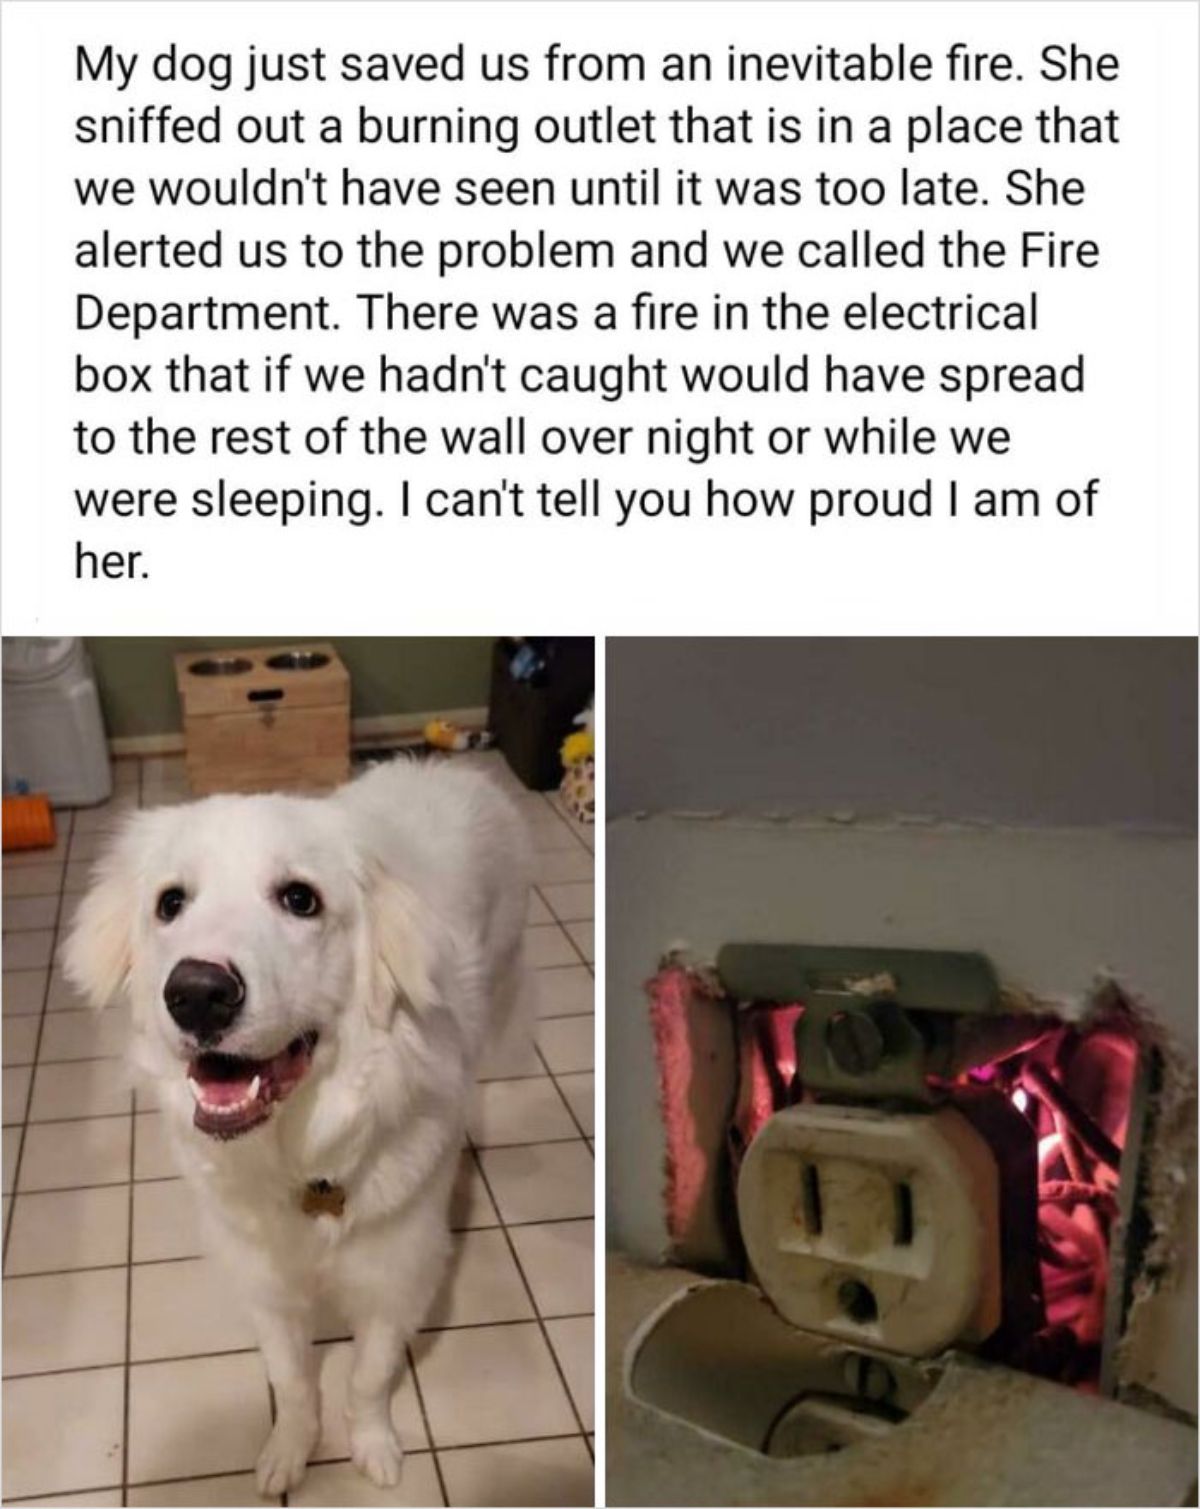 1 photo of fluffy white dog and 1 photo of fault outlet with caption saying the dog saved them from a fire